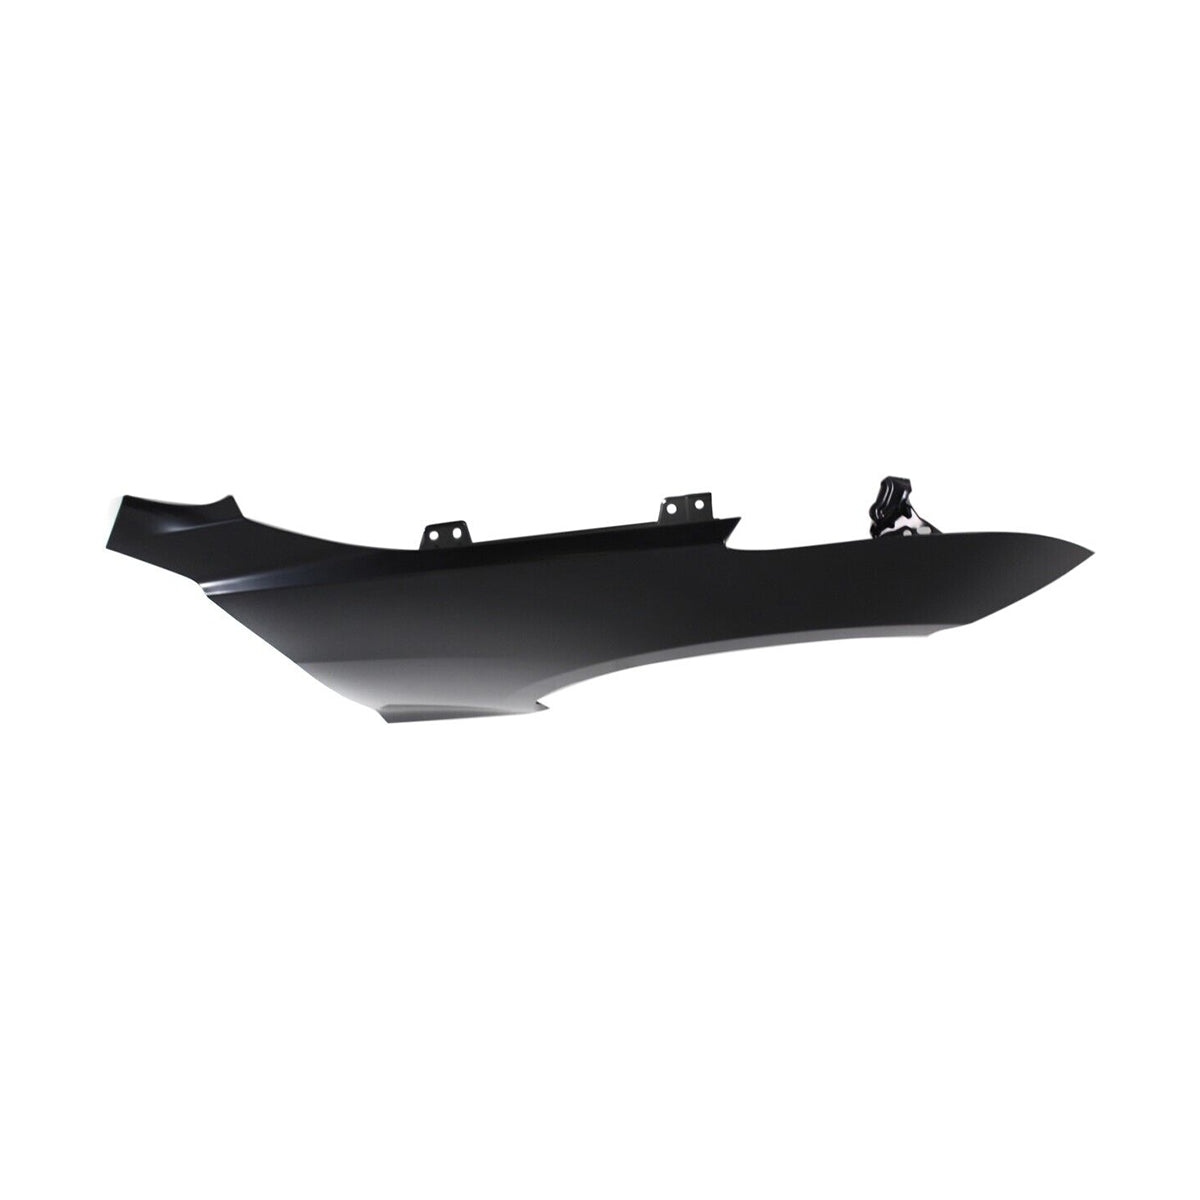 Replacement FRONT FENDER, RH, 2013-2019 Cadillac ATS, 84110676, (Alum)